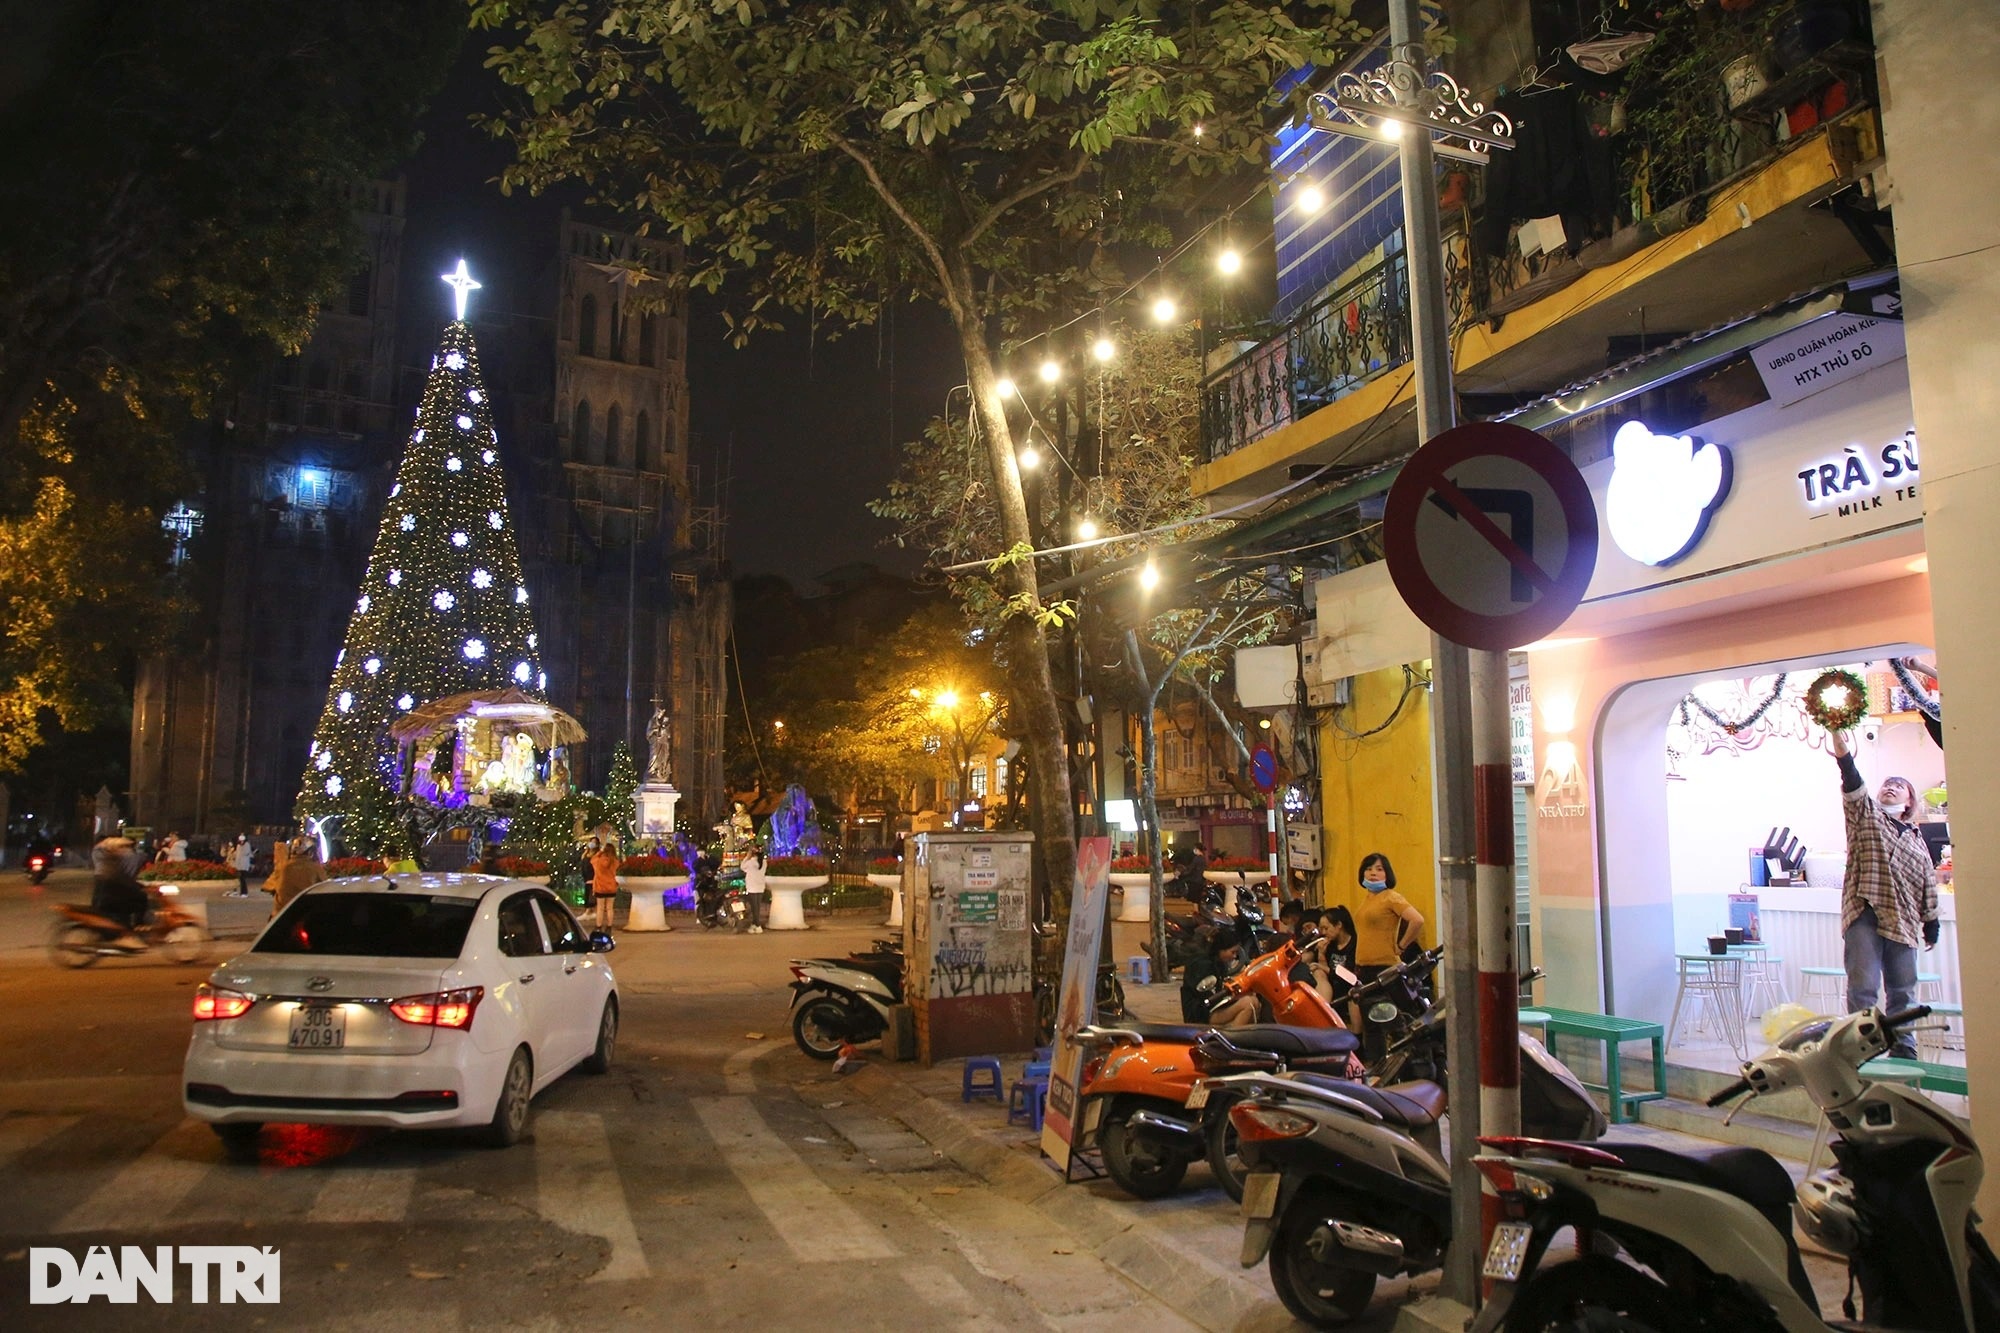 Churches in Hanoi are sparkling to welcome Christmas 2021 - 8